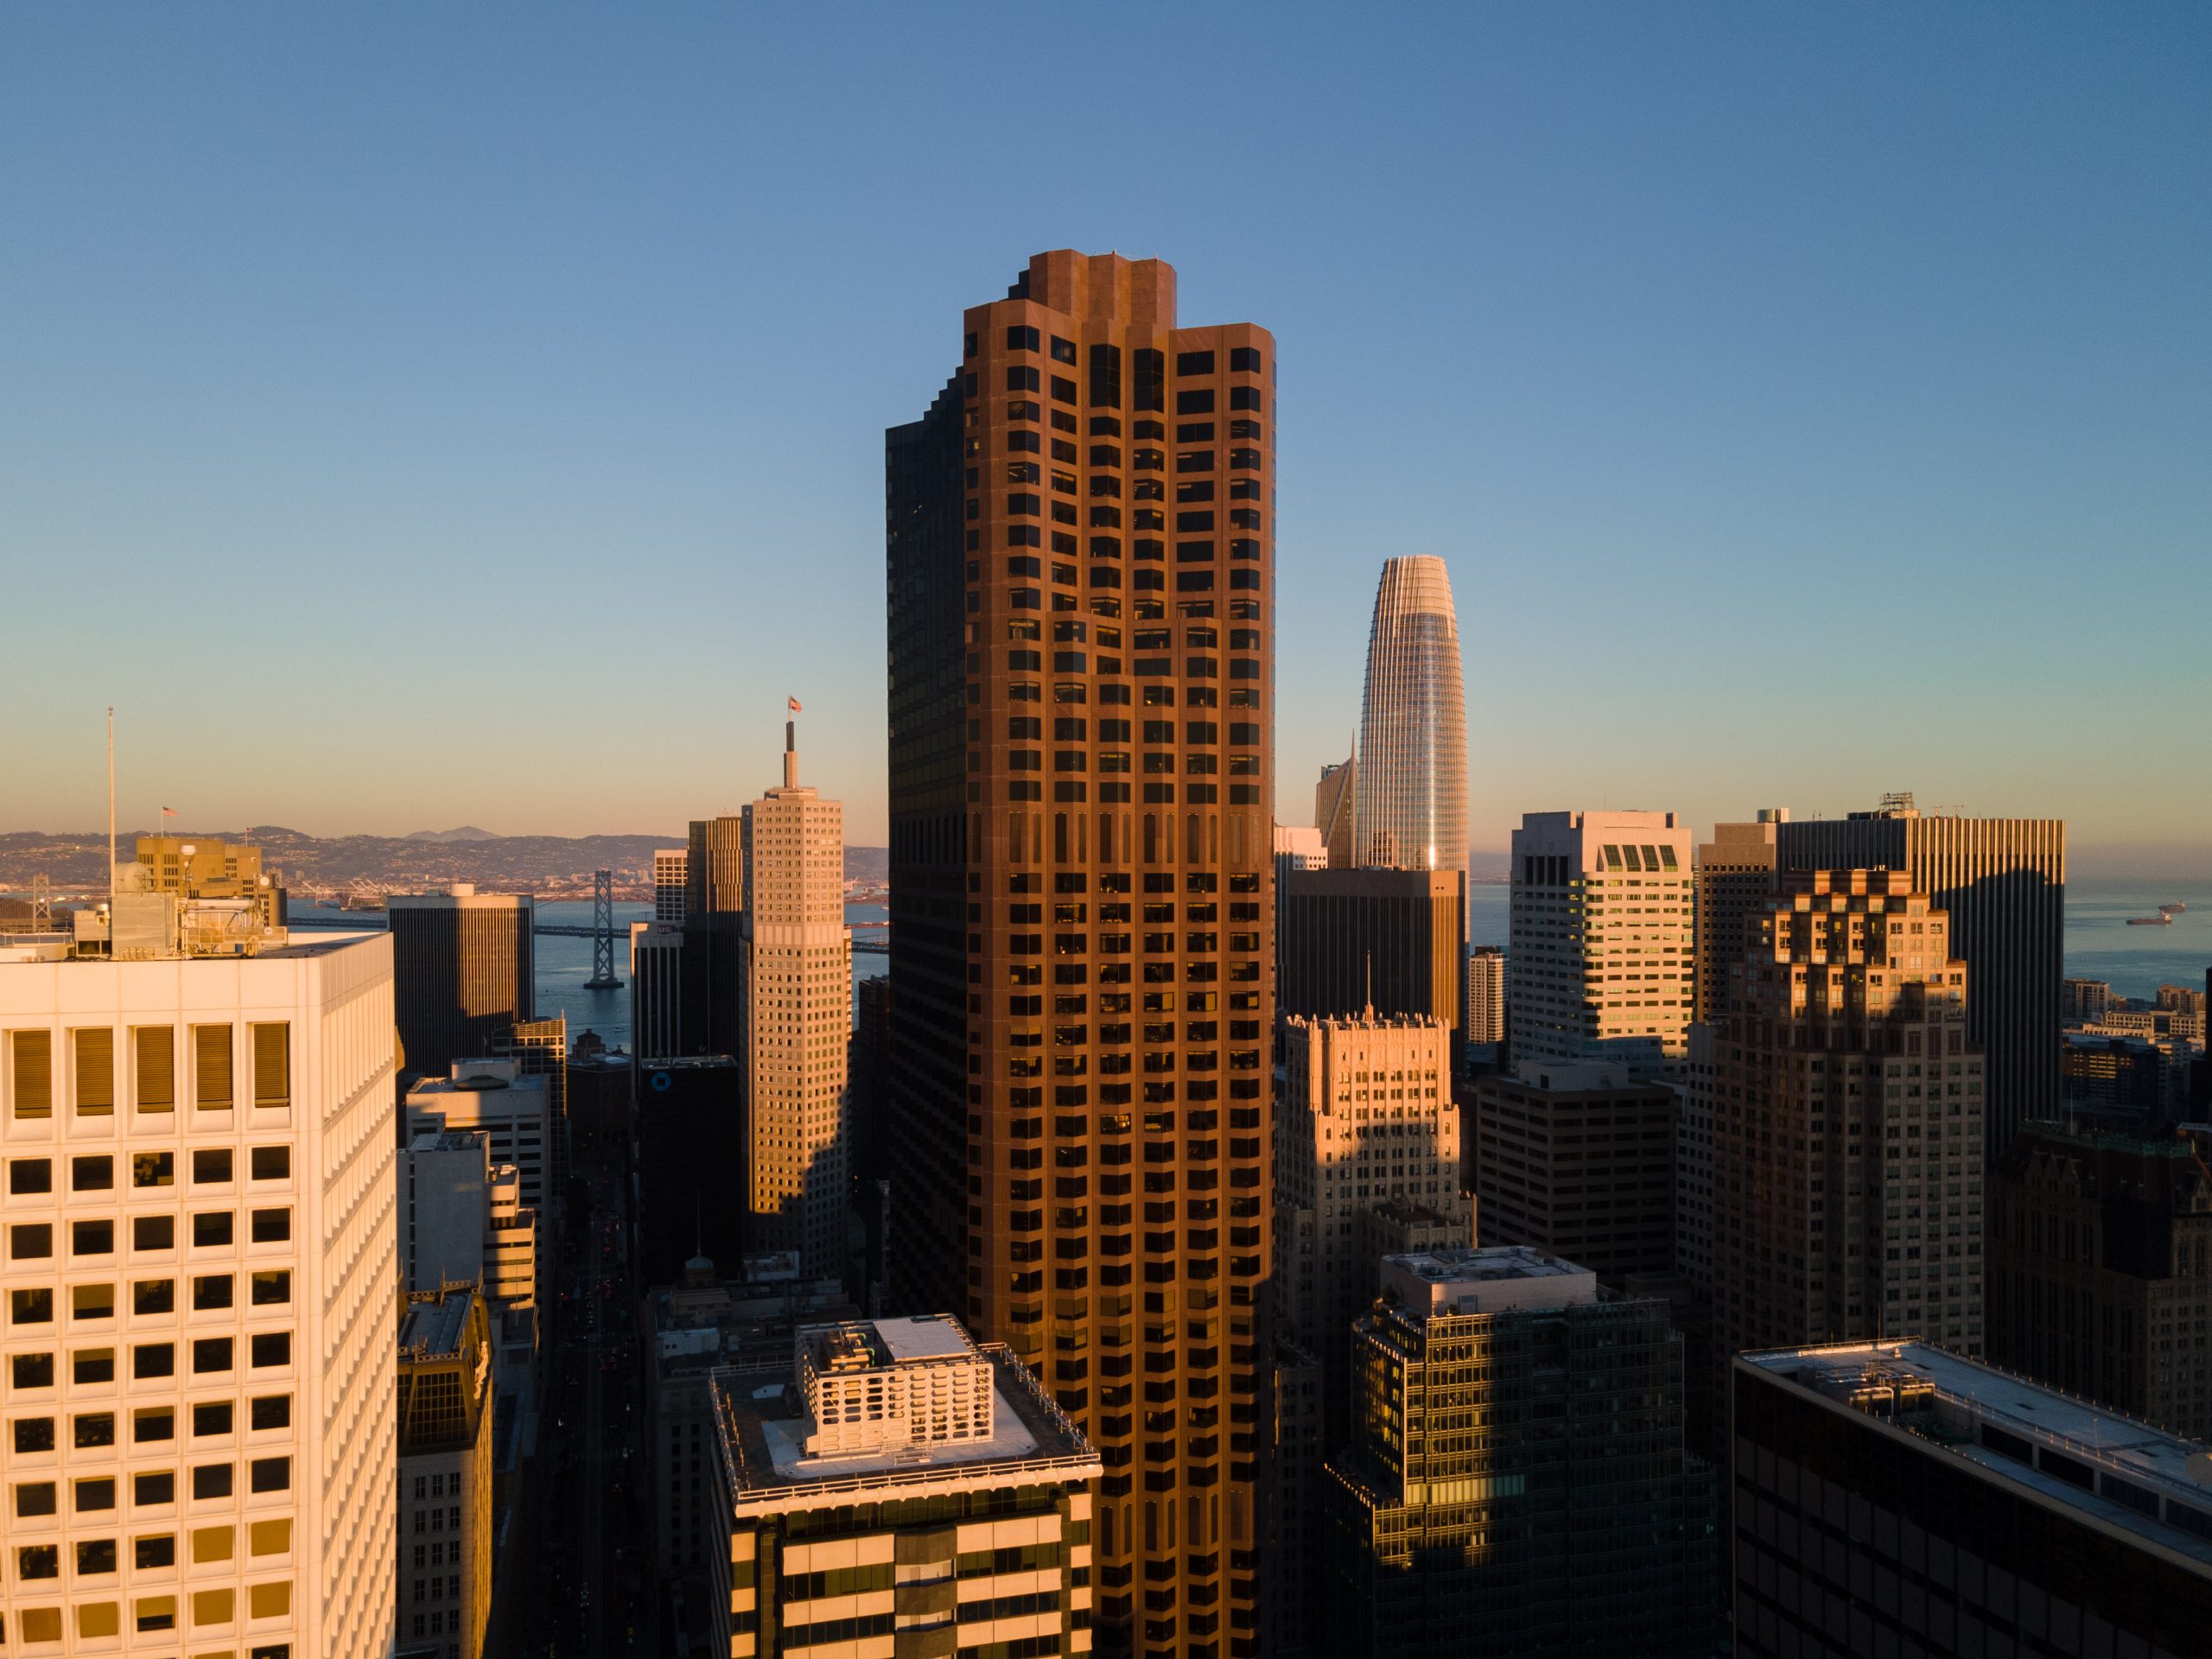 555 California Street with the Salesforce Tower in the background